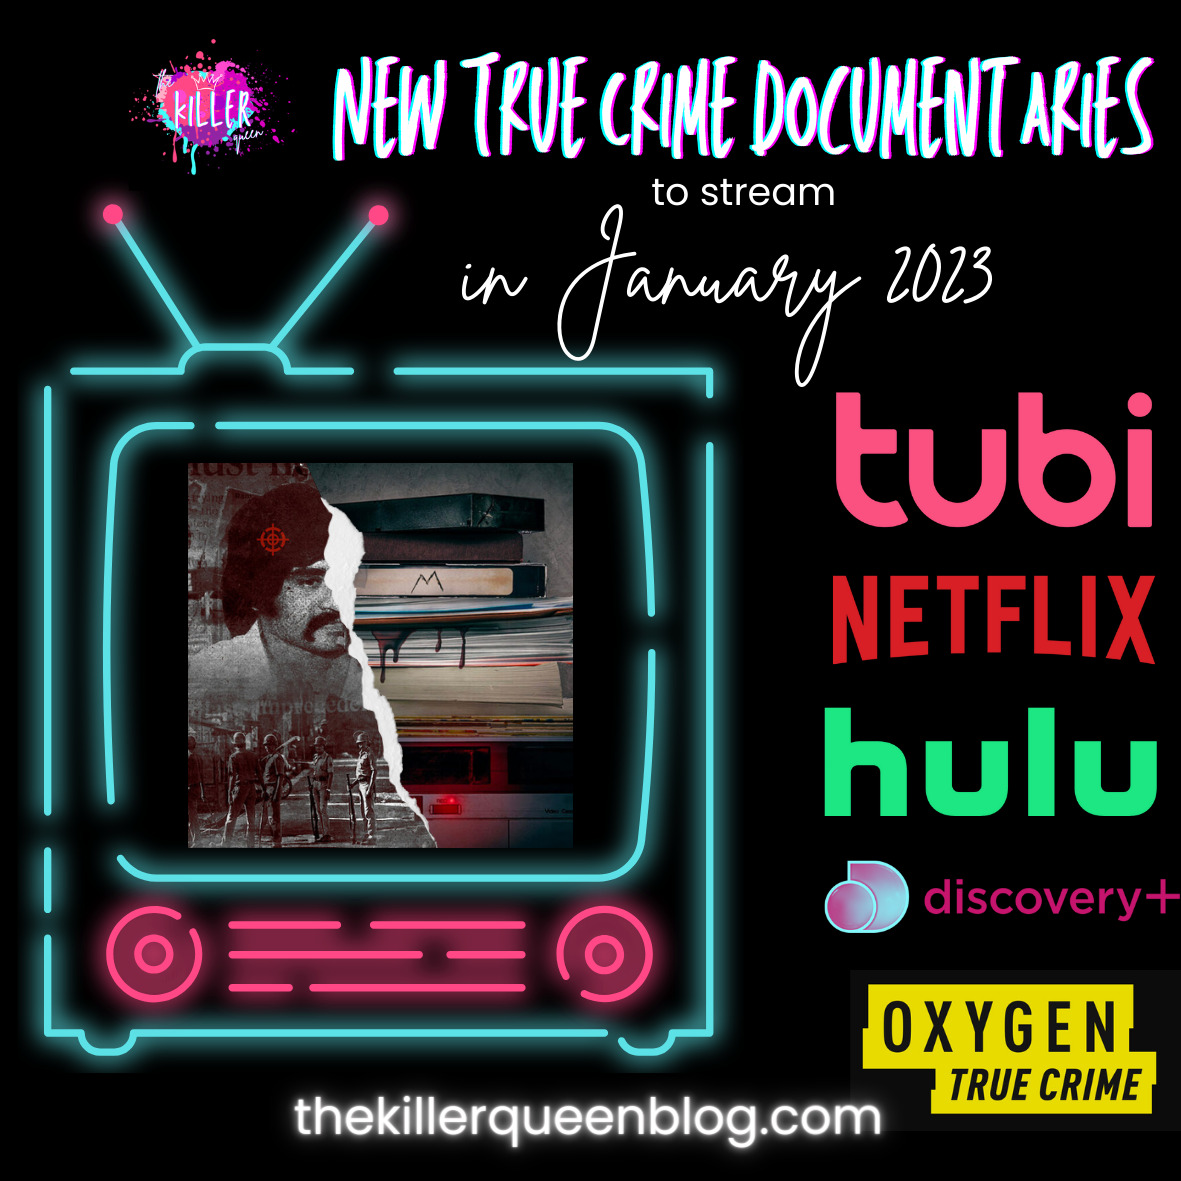 New True Crime Documentaries to Watch in January 2023